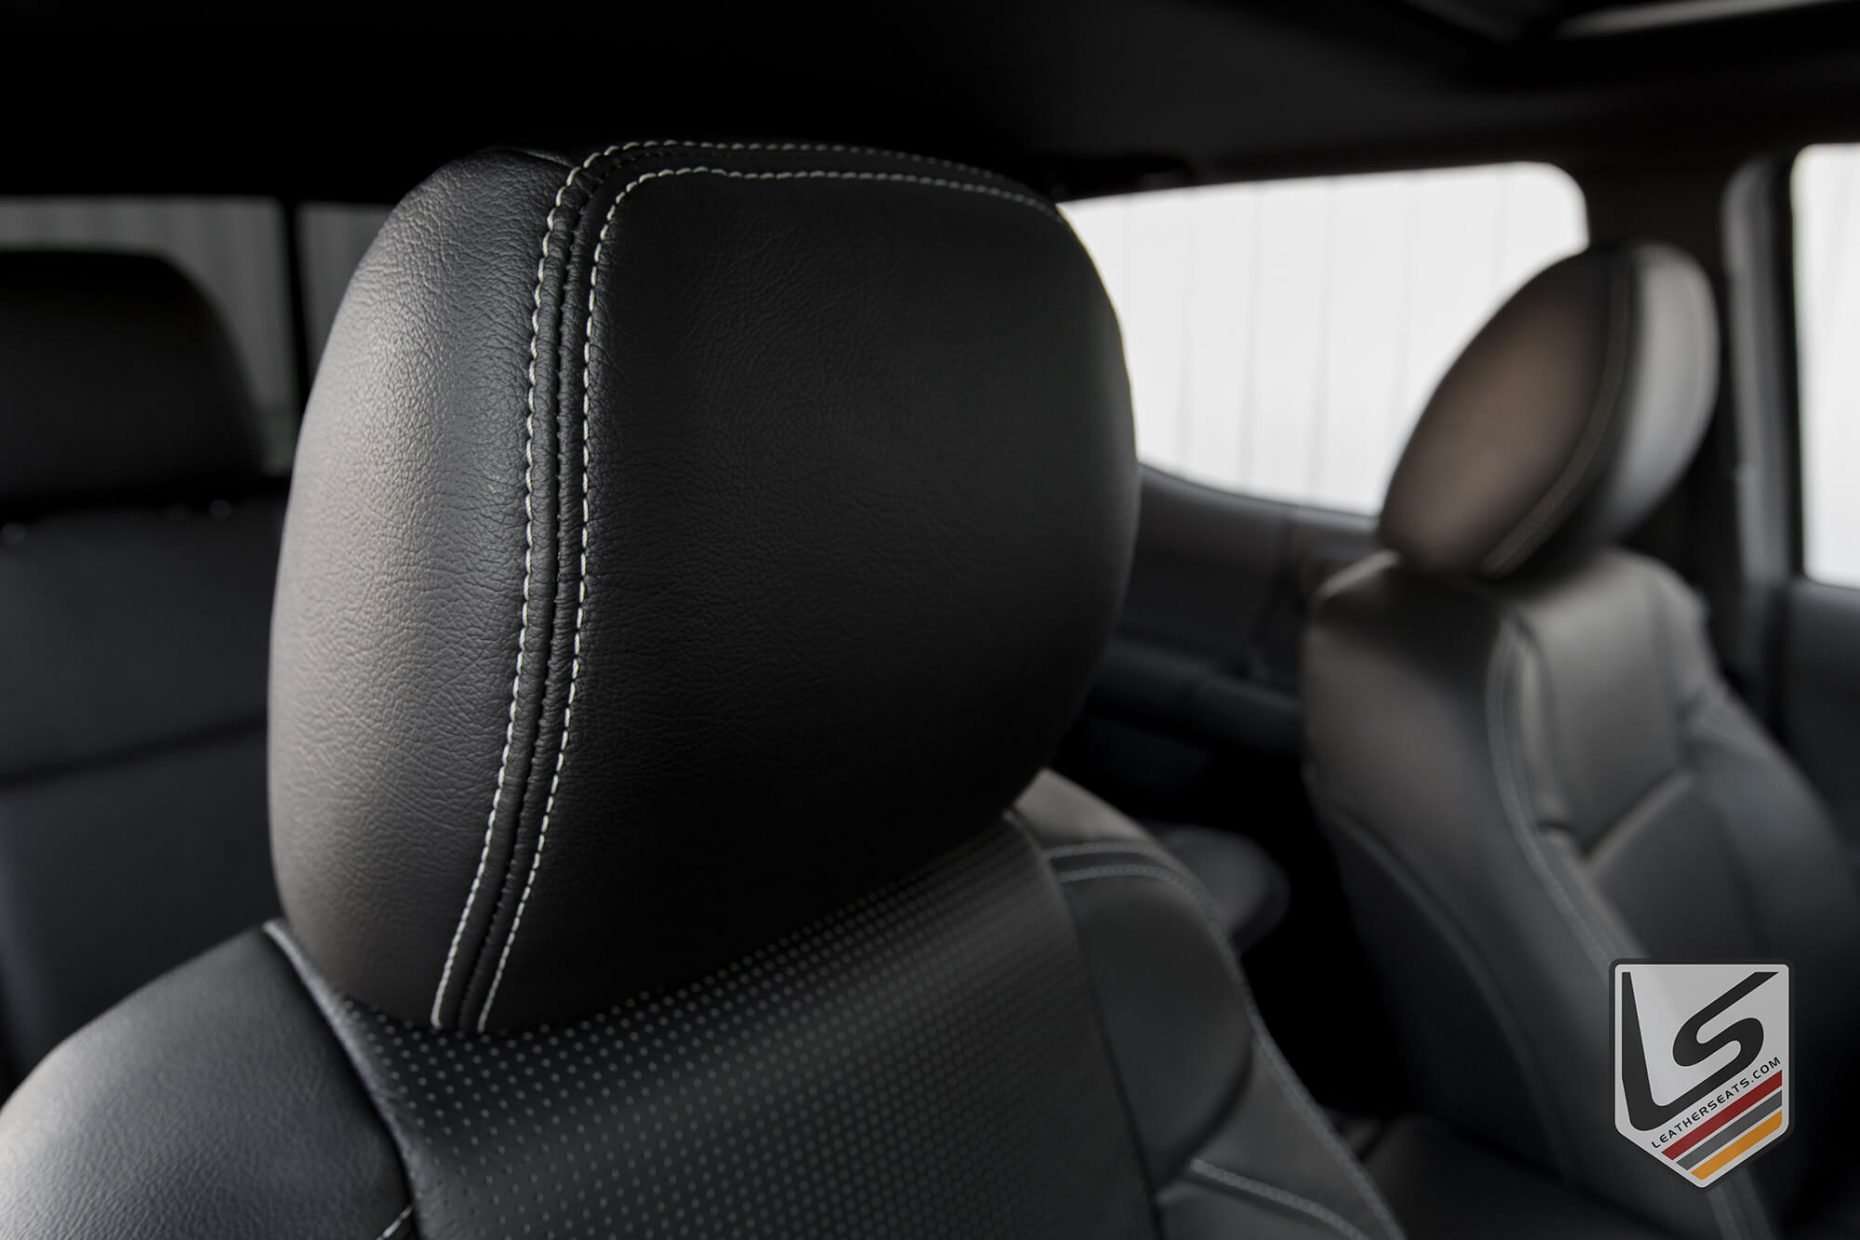 Leather headrest close-up in Black with contrasting Silver stitching